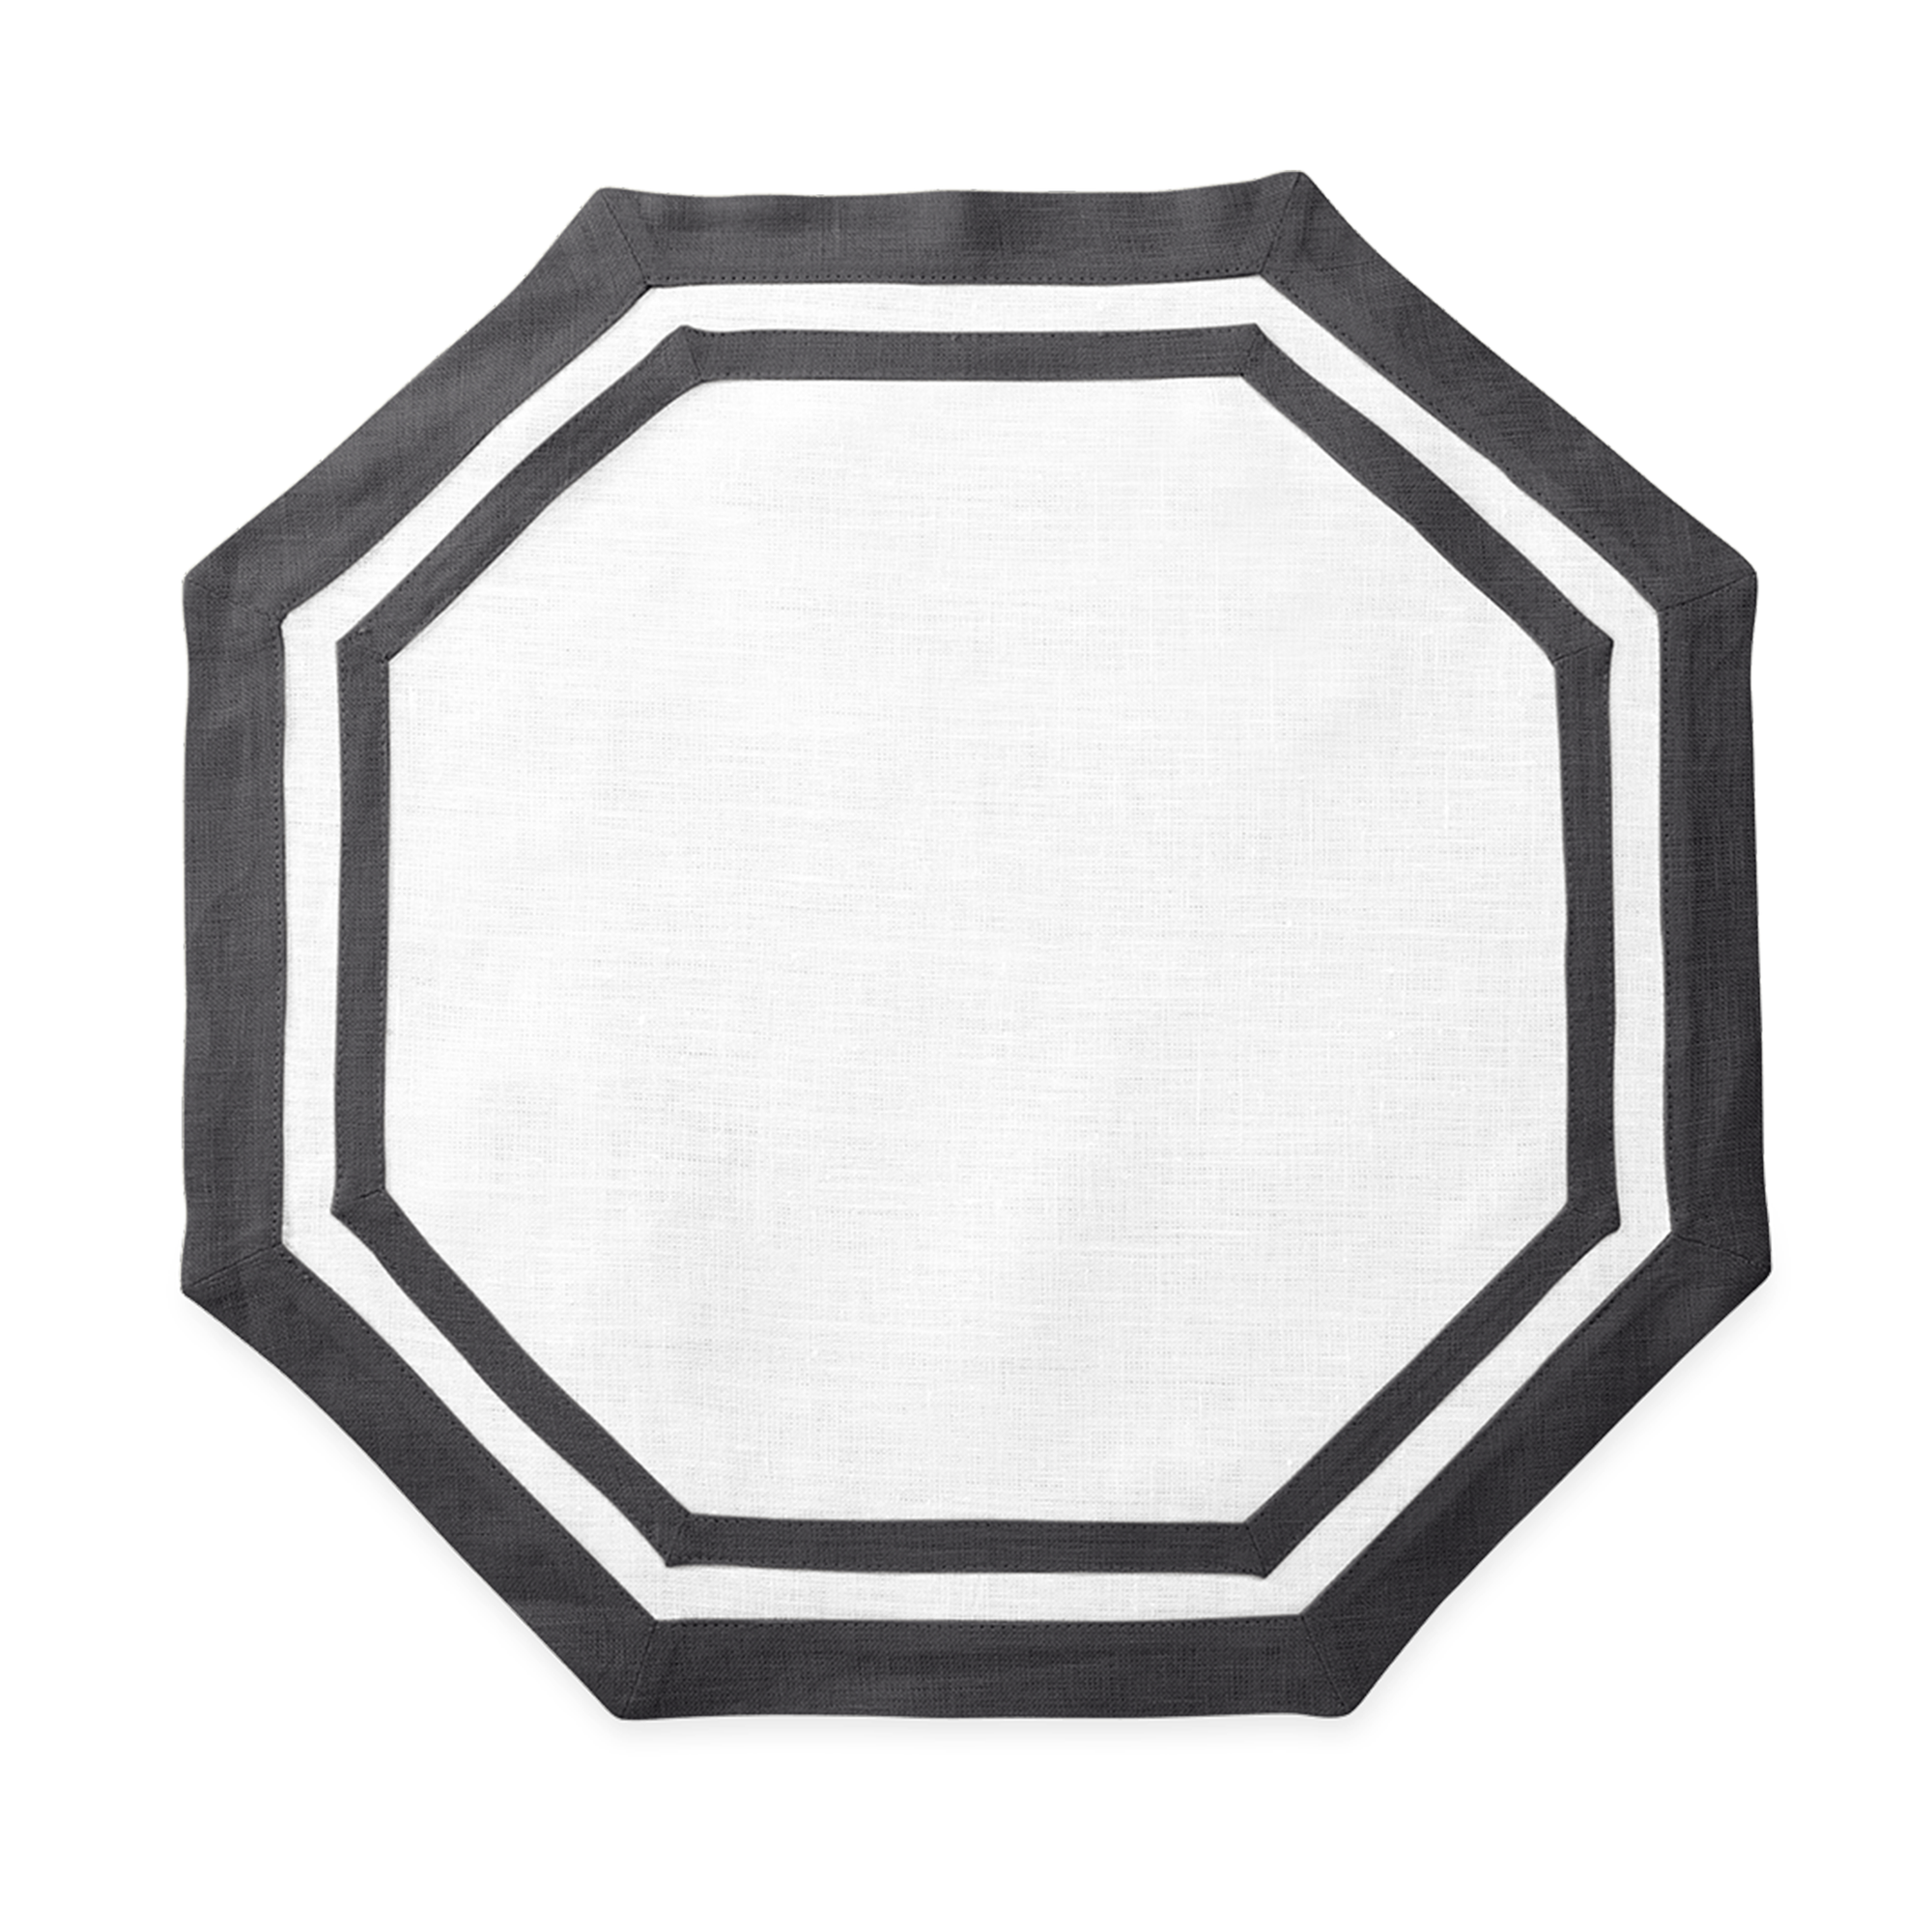 Silo Image of Matouk Double Border Octagon Placemat in Color Smoke Grey